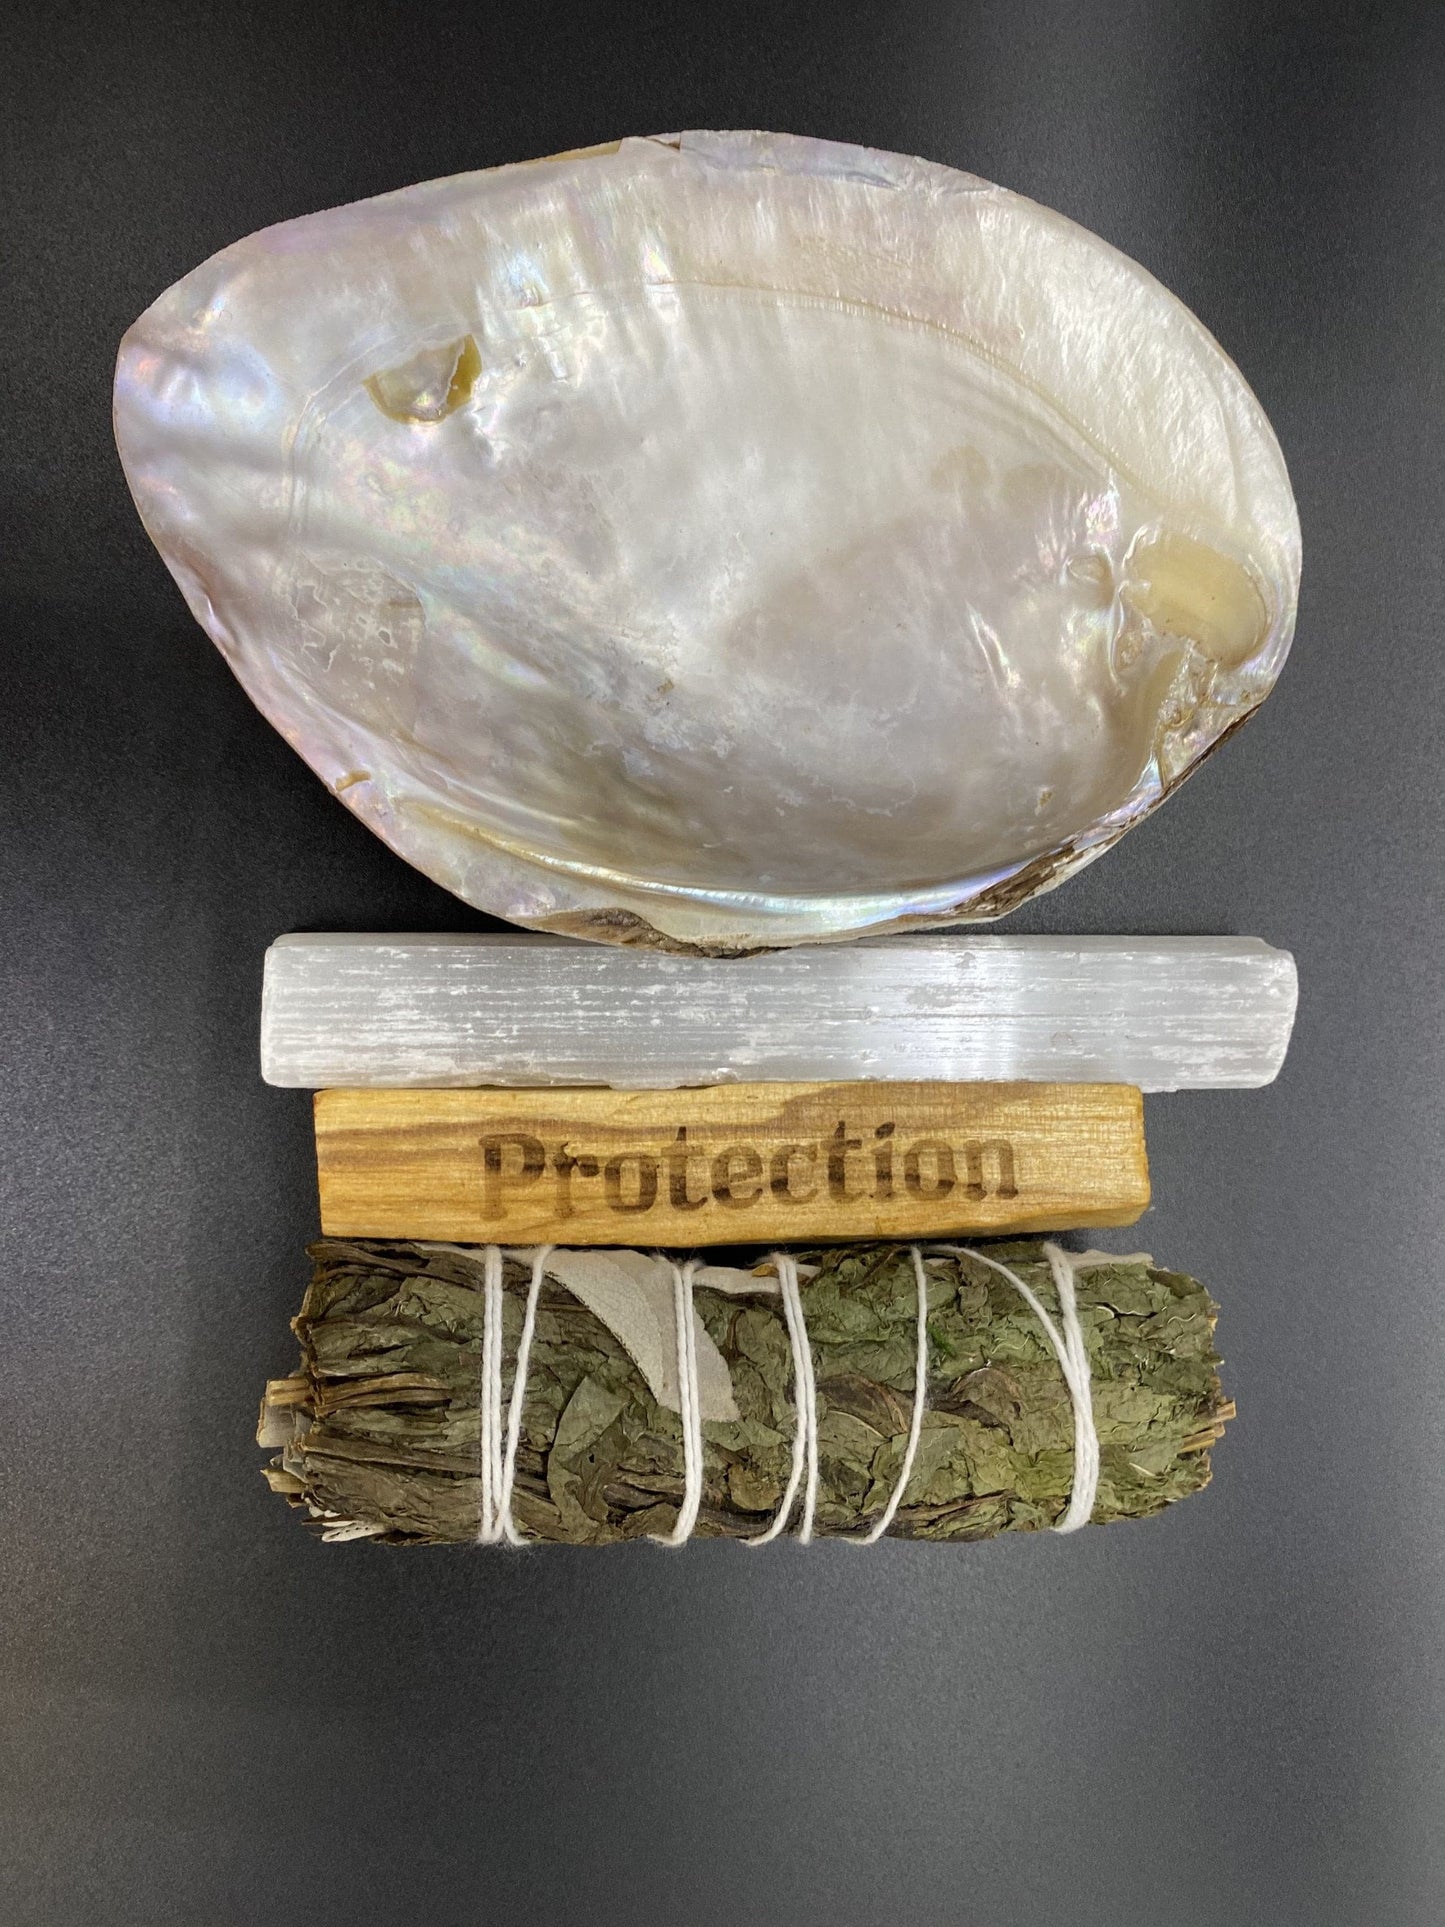 Protection Smudge Kit.